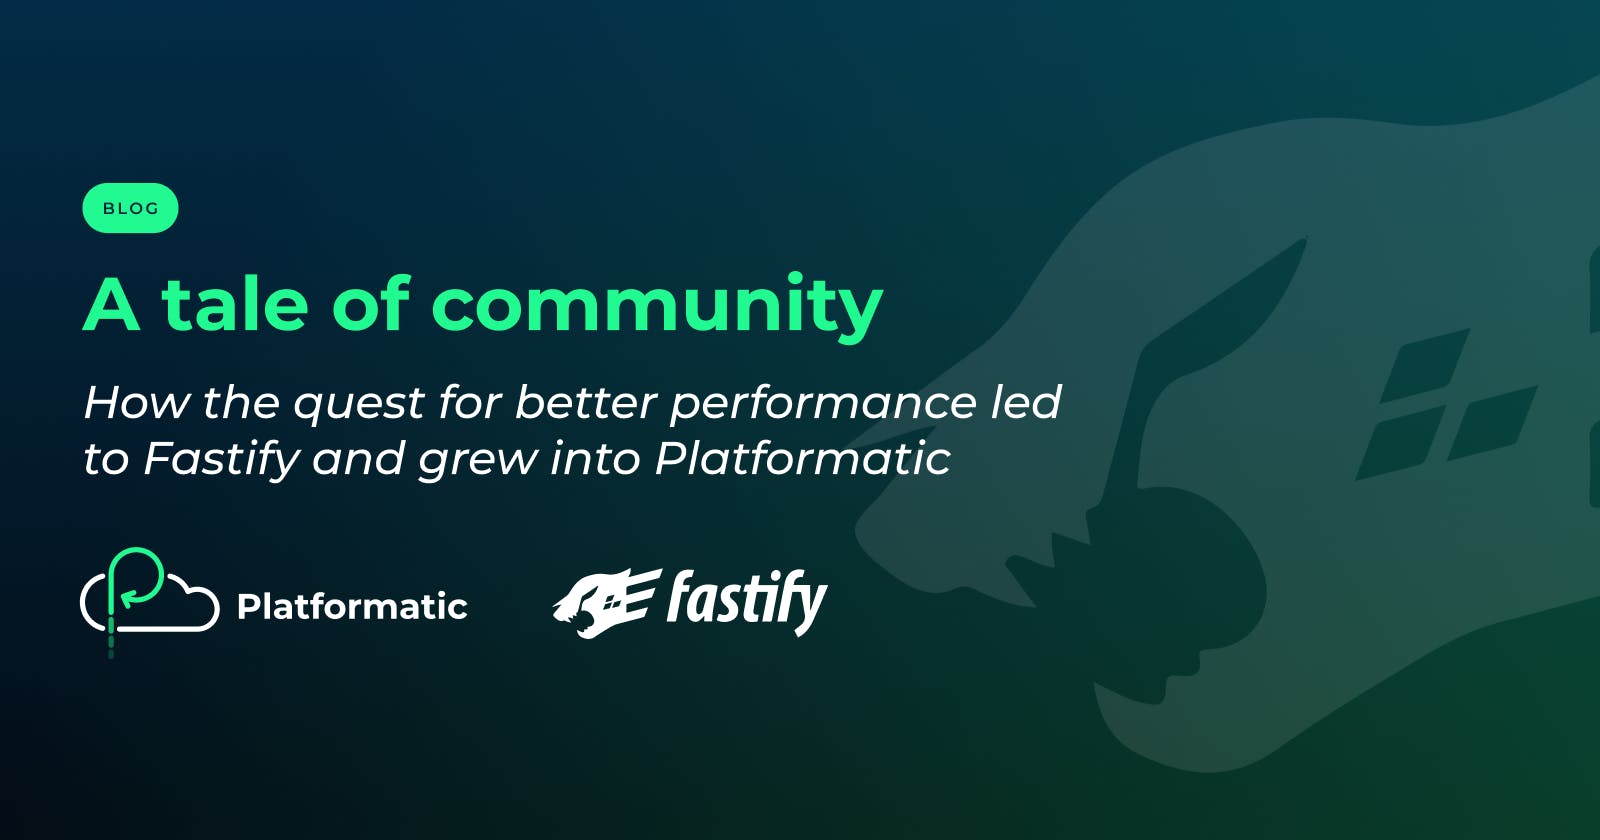 A tale of community: How the quest for better performance led to Fastify and grew into Platformatic